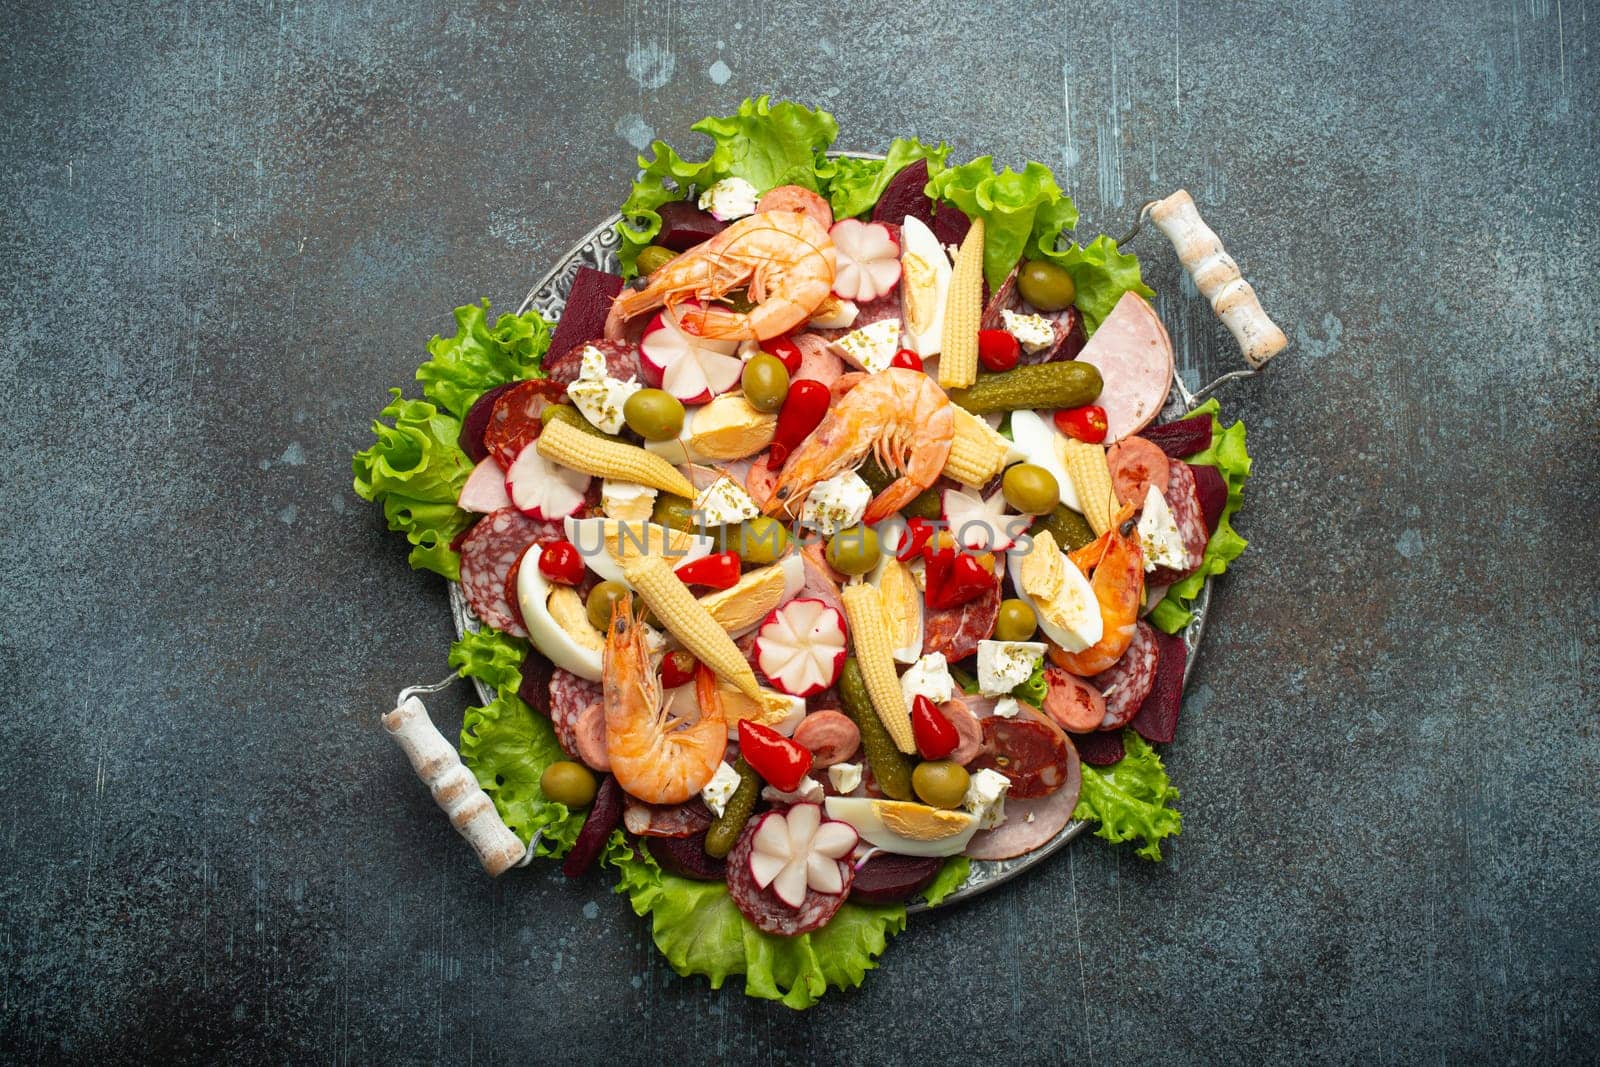 Fiambre, salad of Guatemala, Mexico and Latin America, on large plate top view white wooden background top view with cold cuts, shrimps. Festive dish for All Saints Day (Day Of The Dead) celebration by its_al_dente